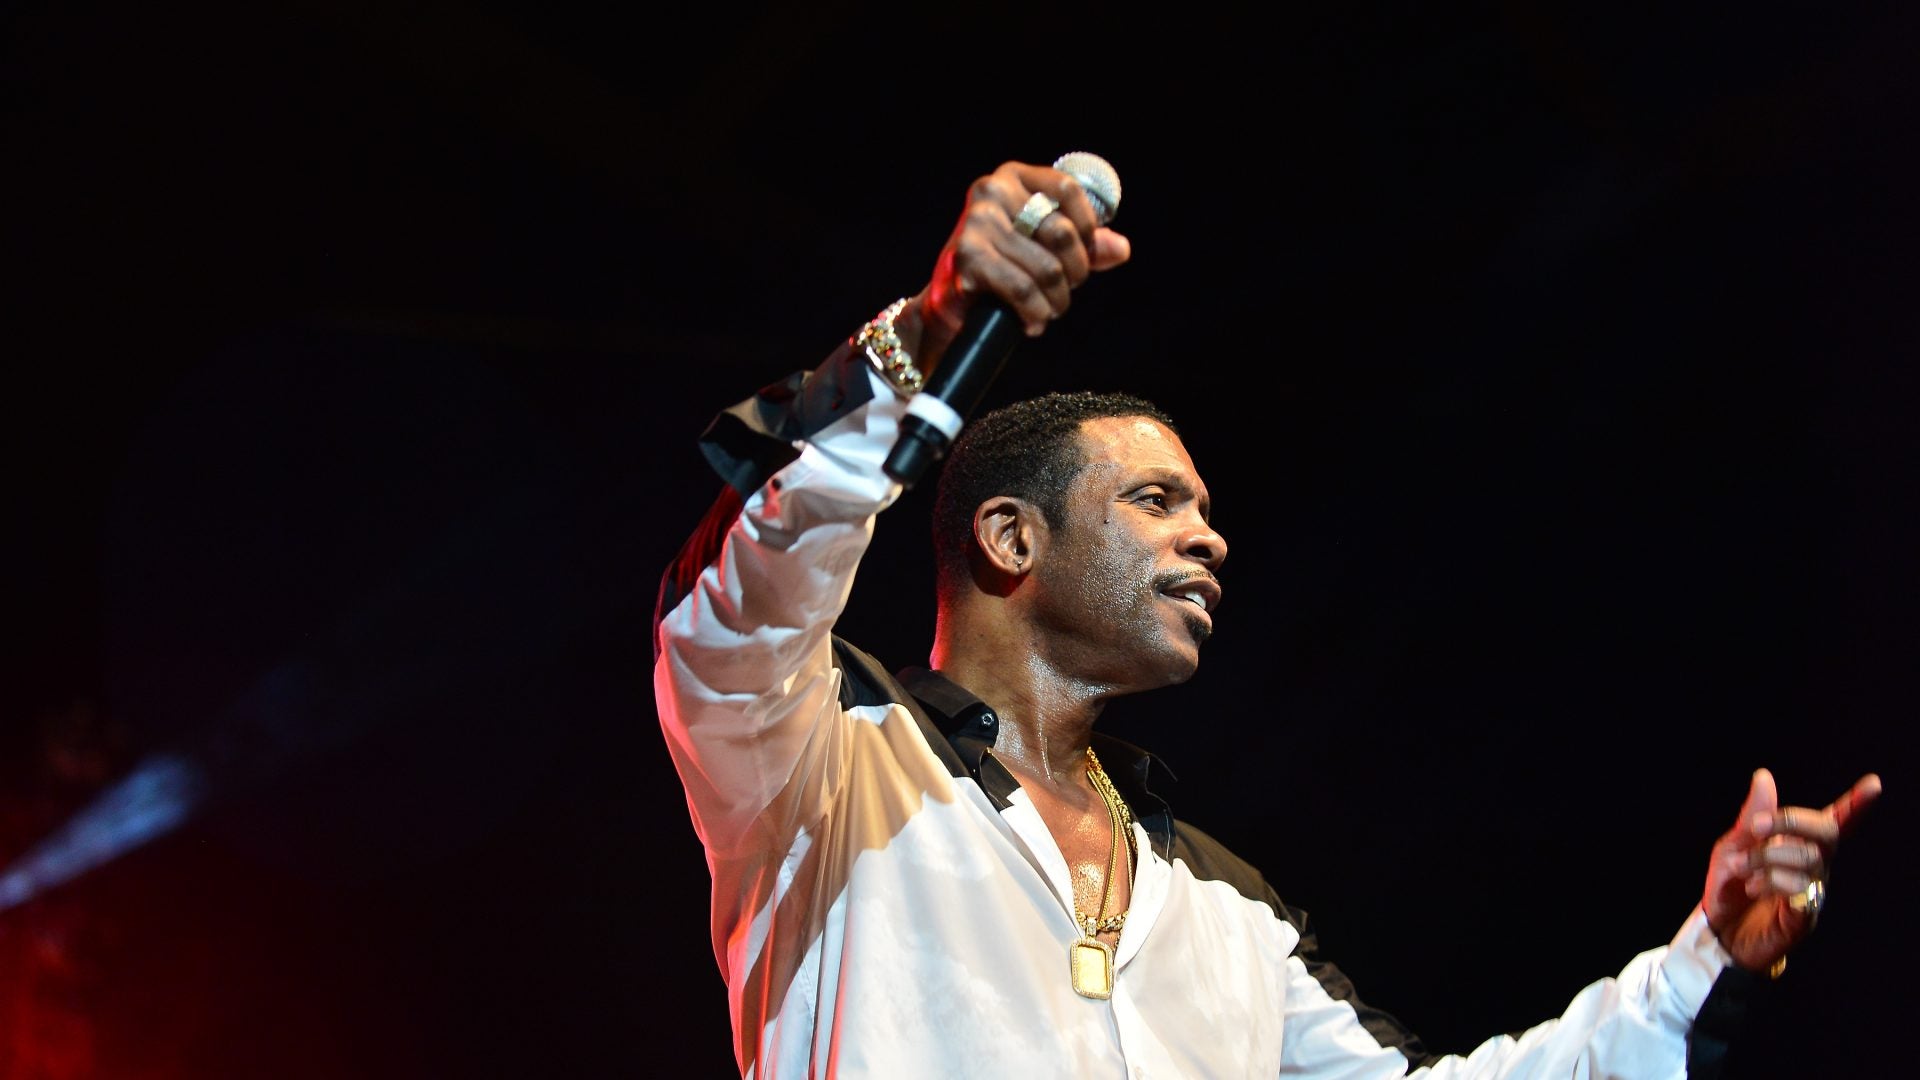 Our Favorite Photos of Birthday Boy Keith Sweat Showing Off His Signature Swag On Stage